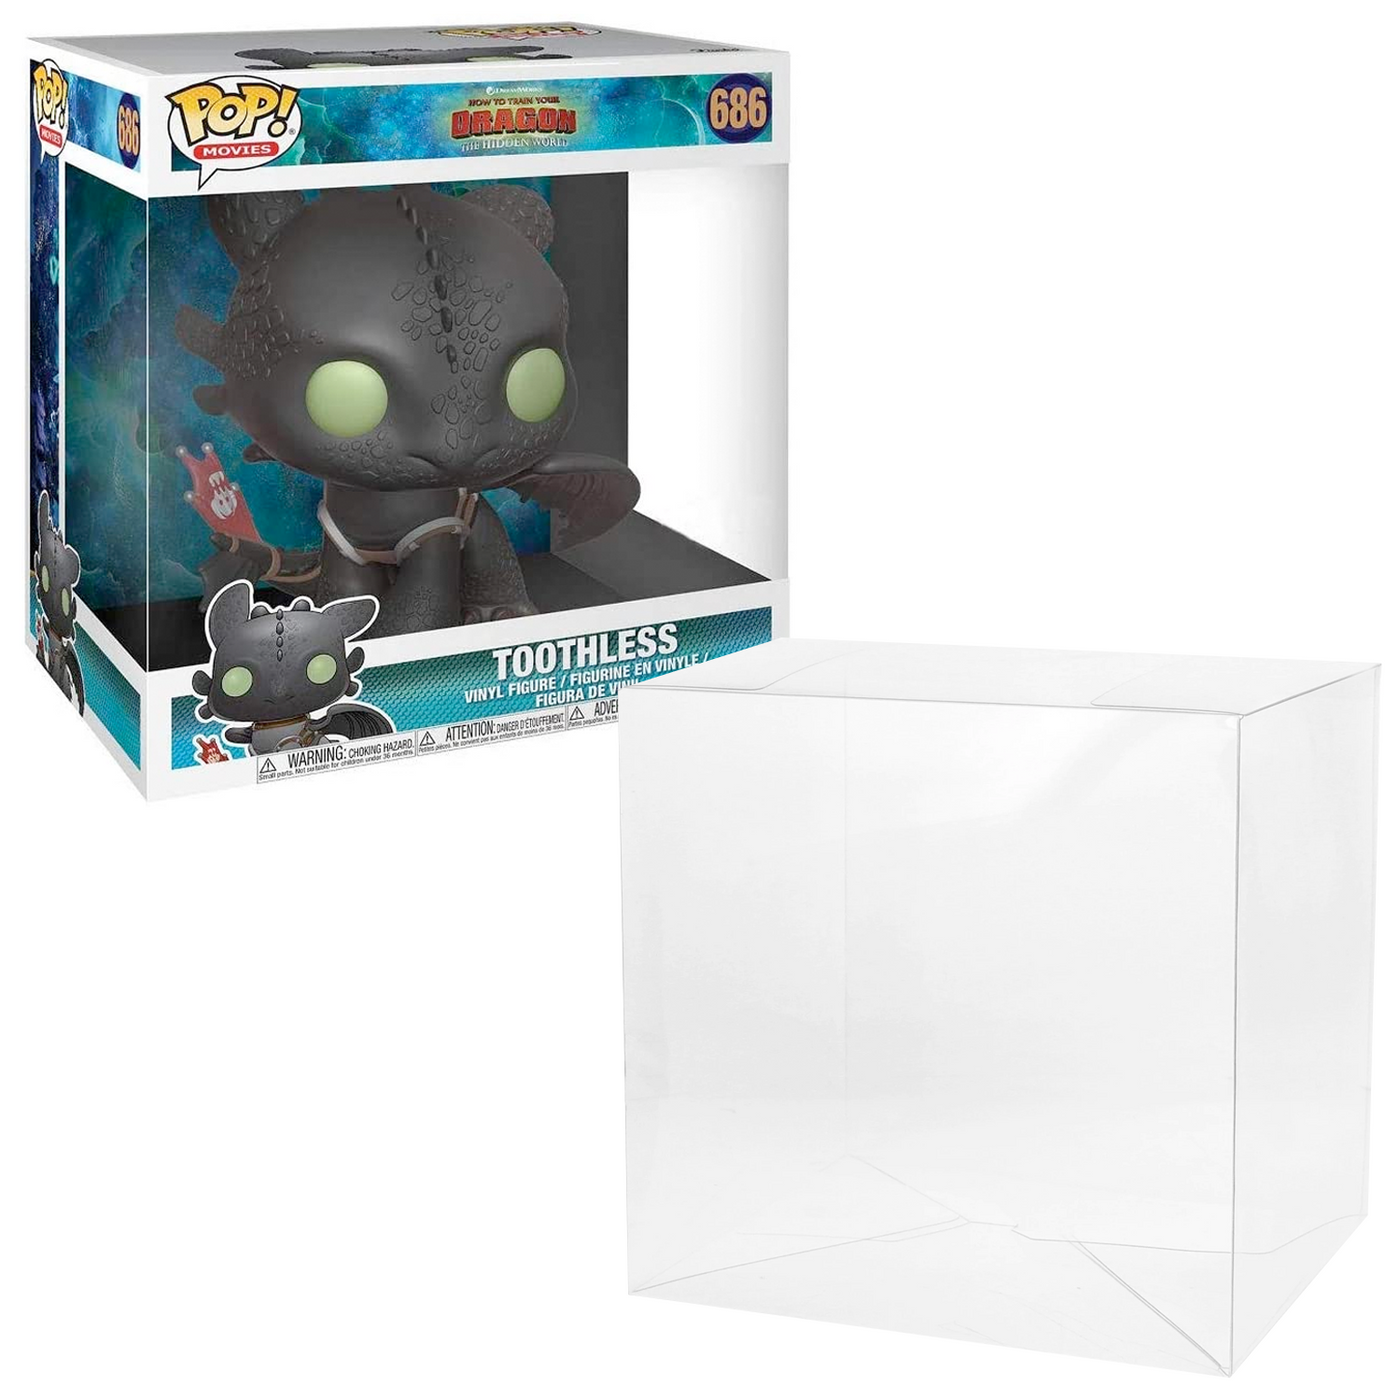 toothless wide 10 inch best funko pop protectors thick strong uv scratch flat top stack vinyl display geek plastic shield vaulted eco armor fits collect protect display case kollector protector